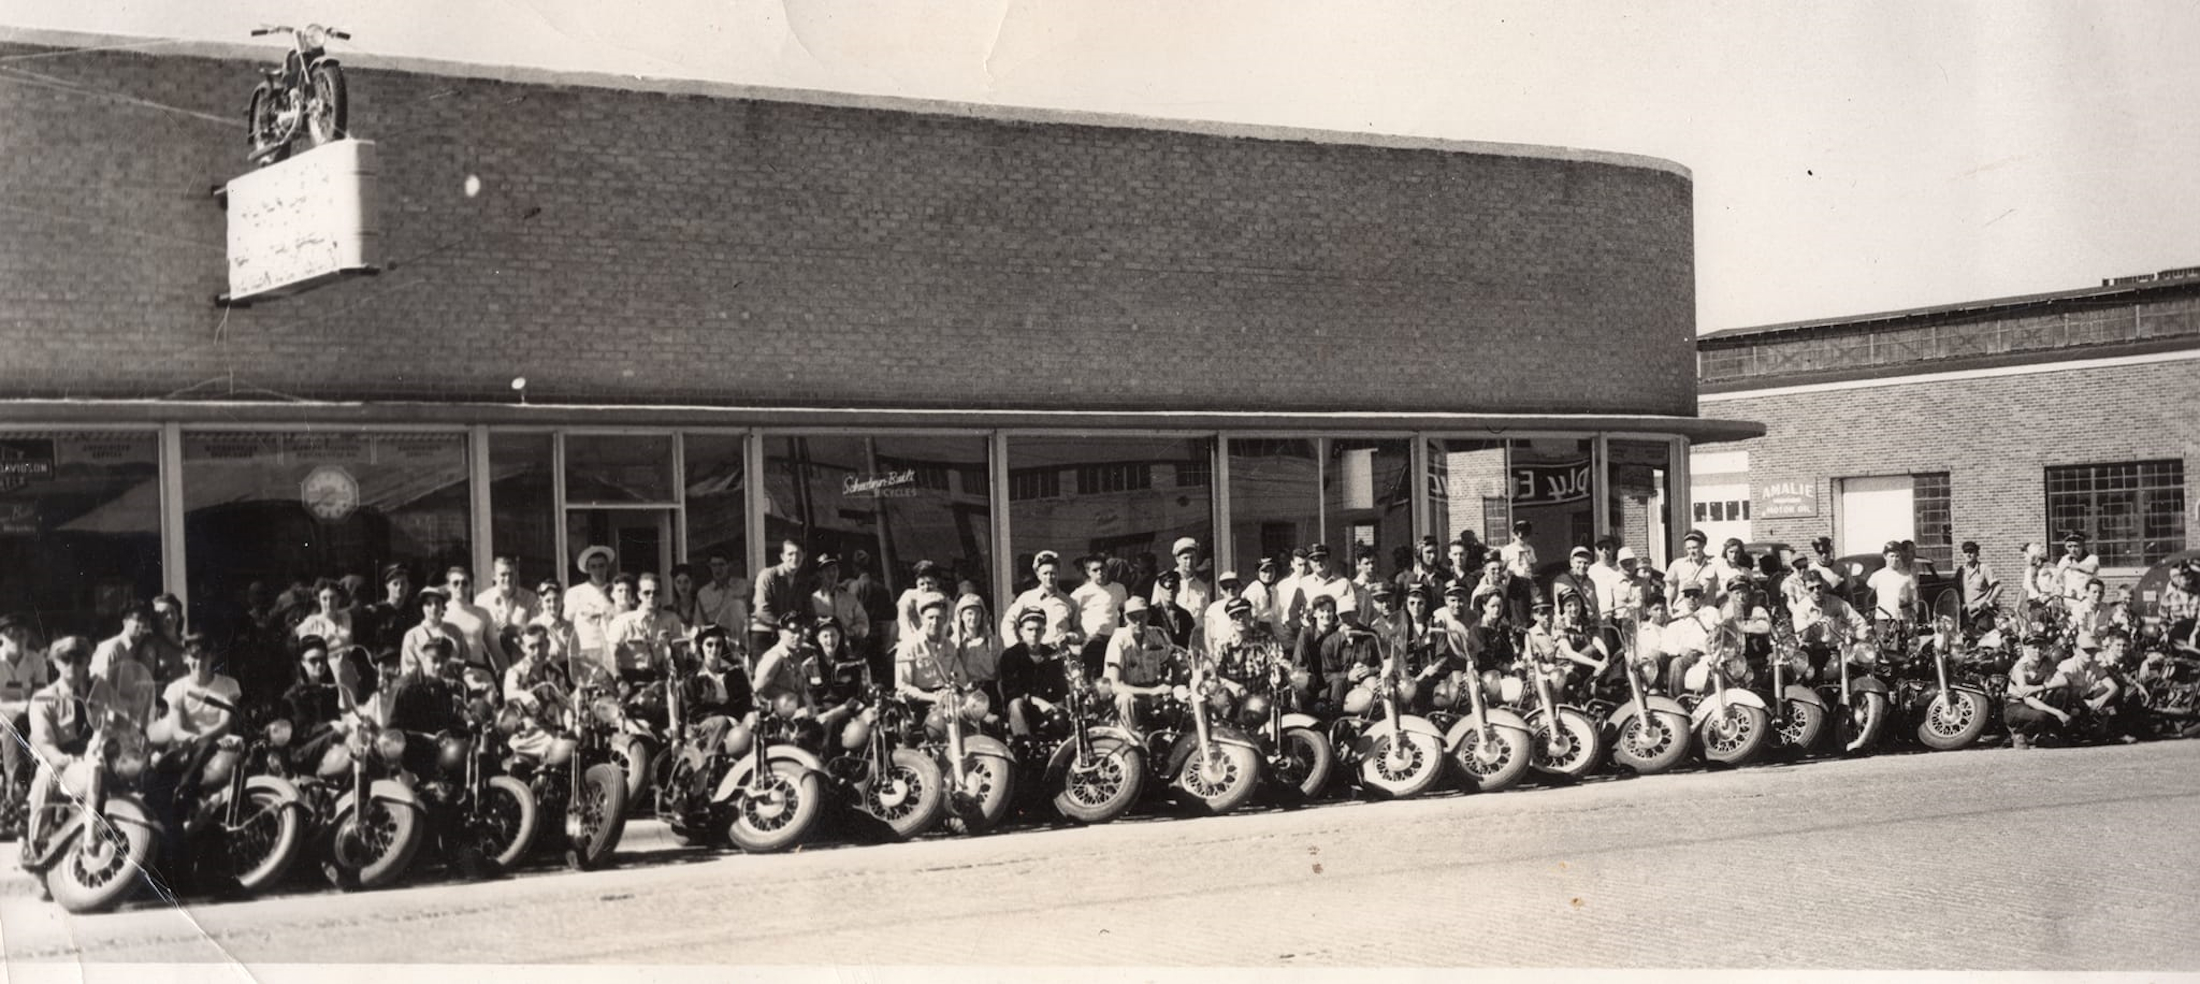 Motorcyclists Gather in Amarillo 1940s